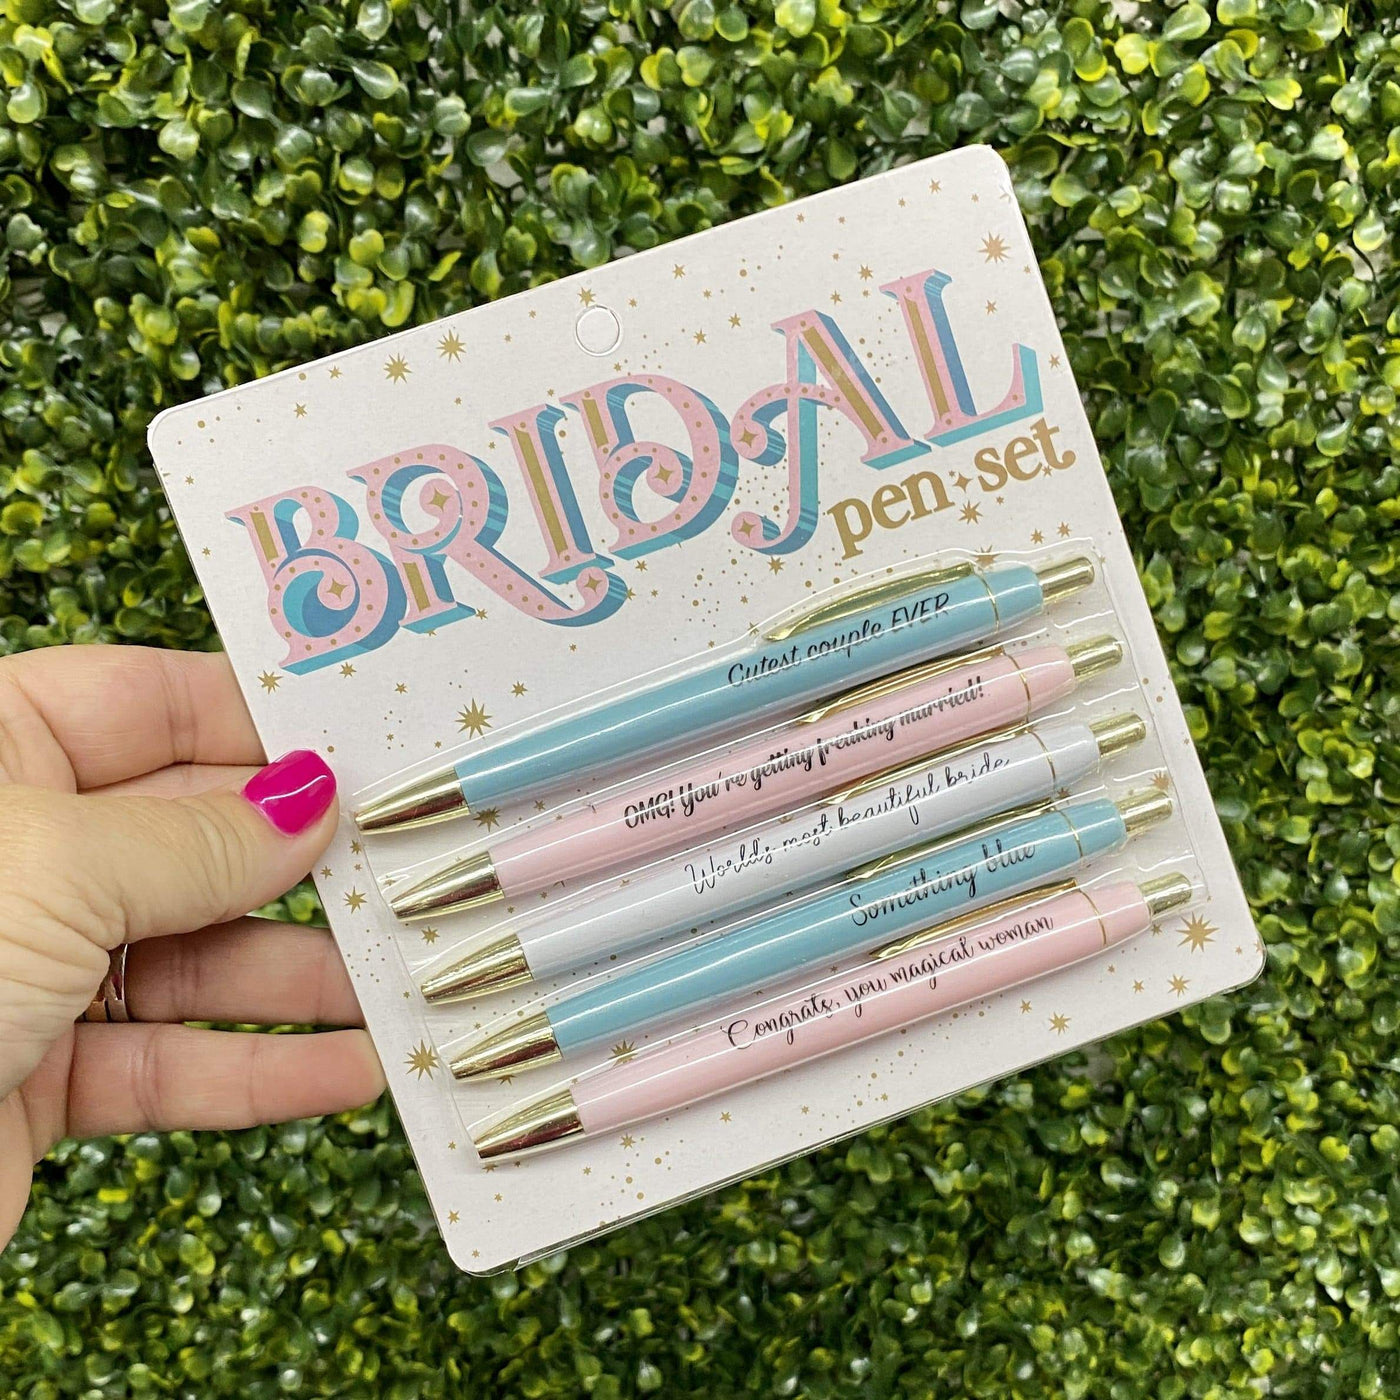 Bridal Pen Set Shabby Chic Boutique and Tanning Salon